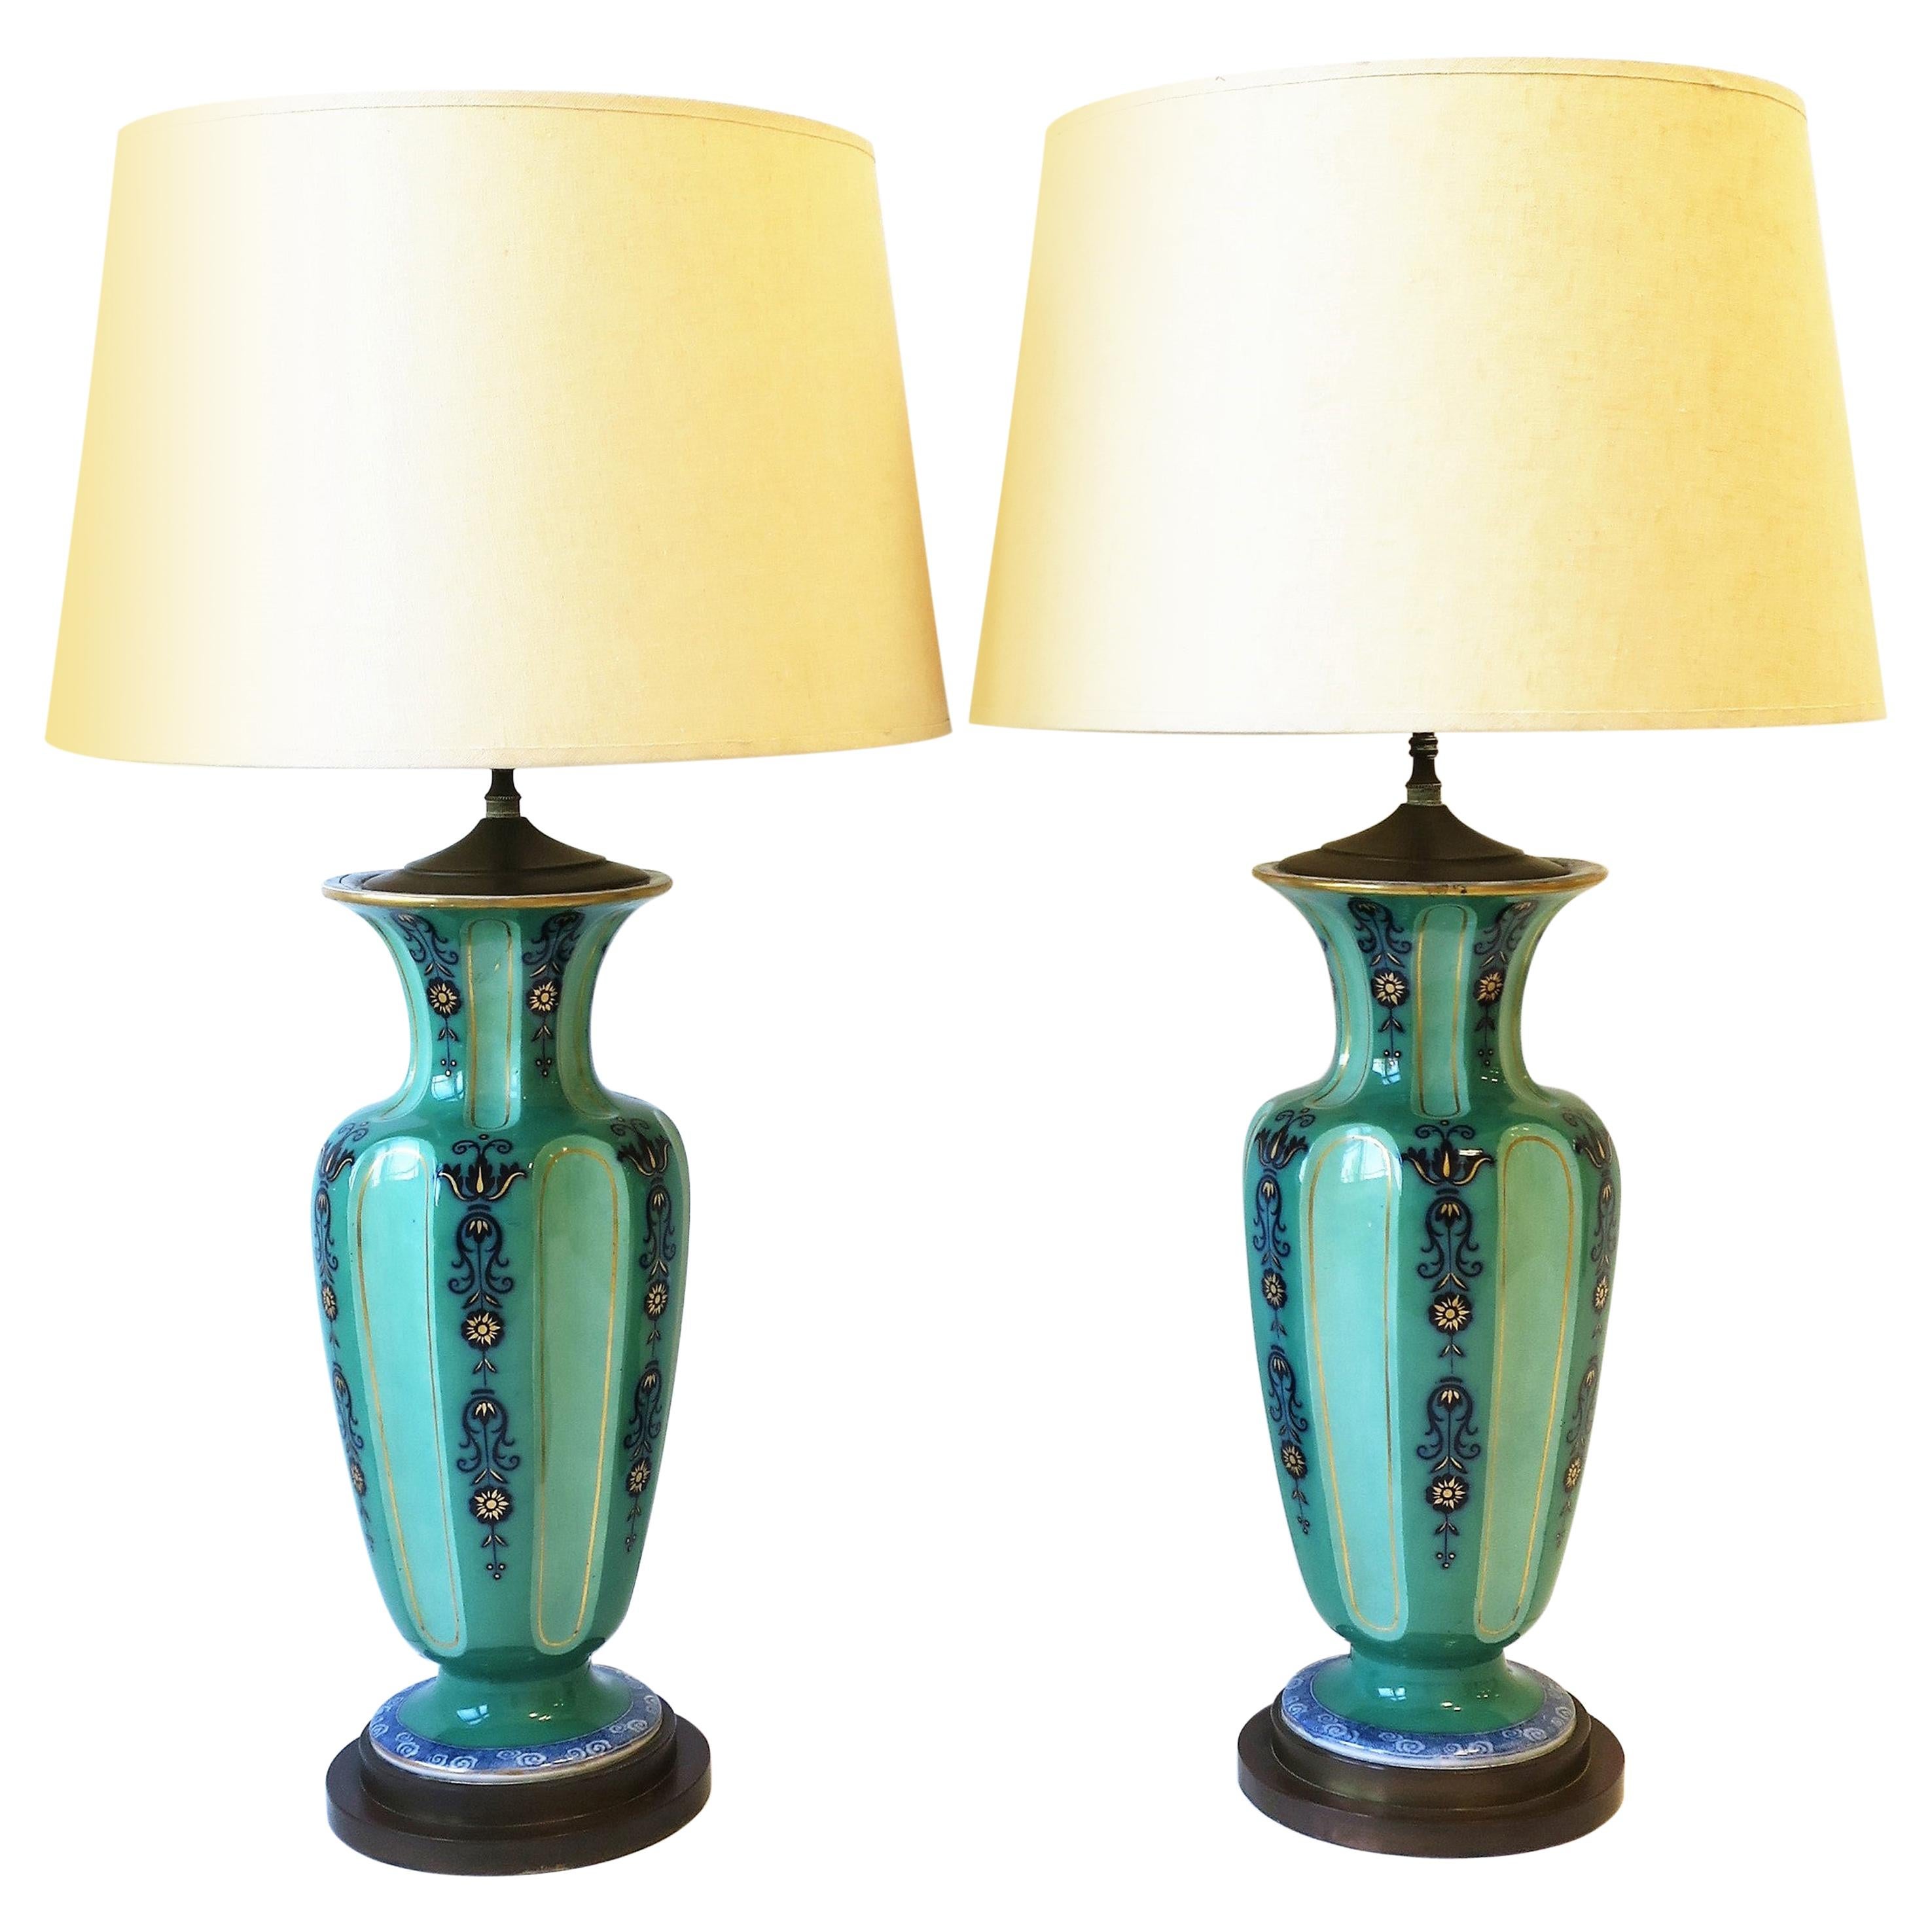 Dutch Blue White Green Porcelain Table Lamps Ginger Jar Style, circa 1930s